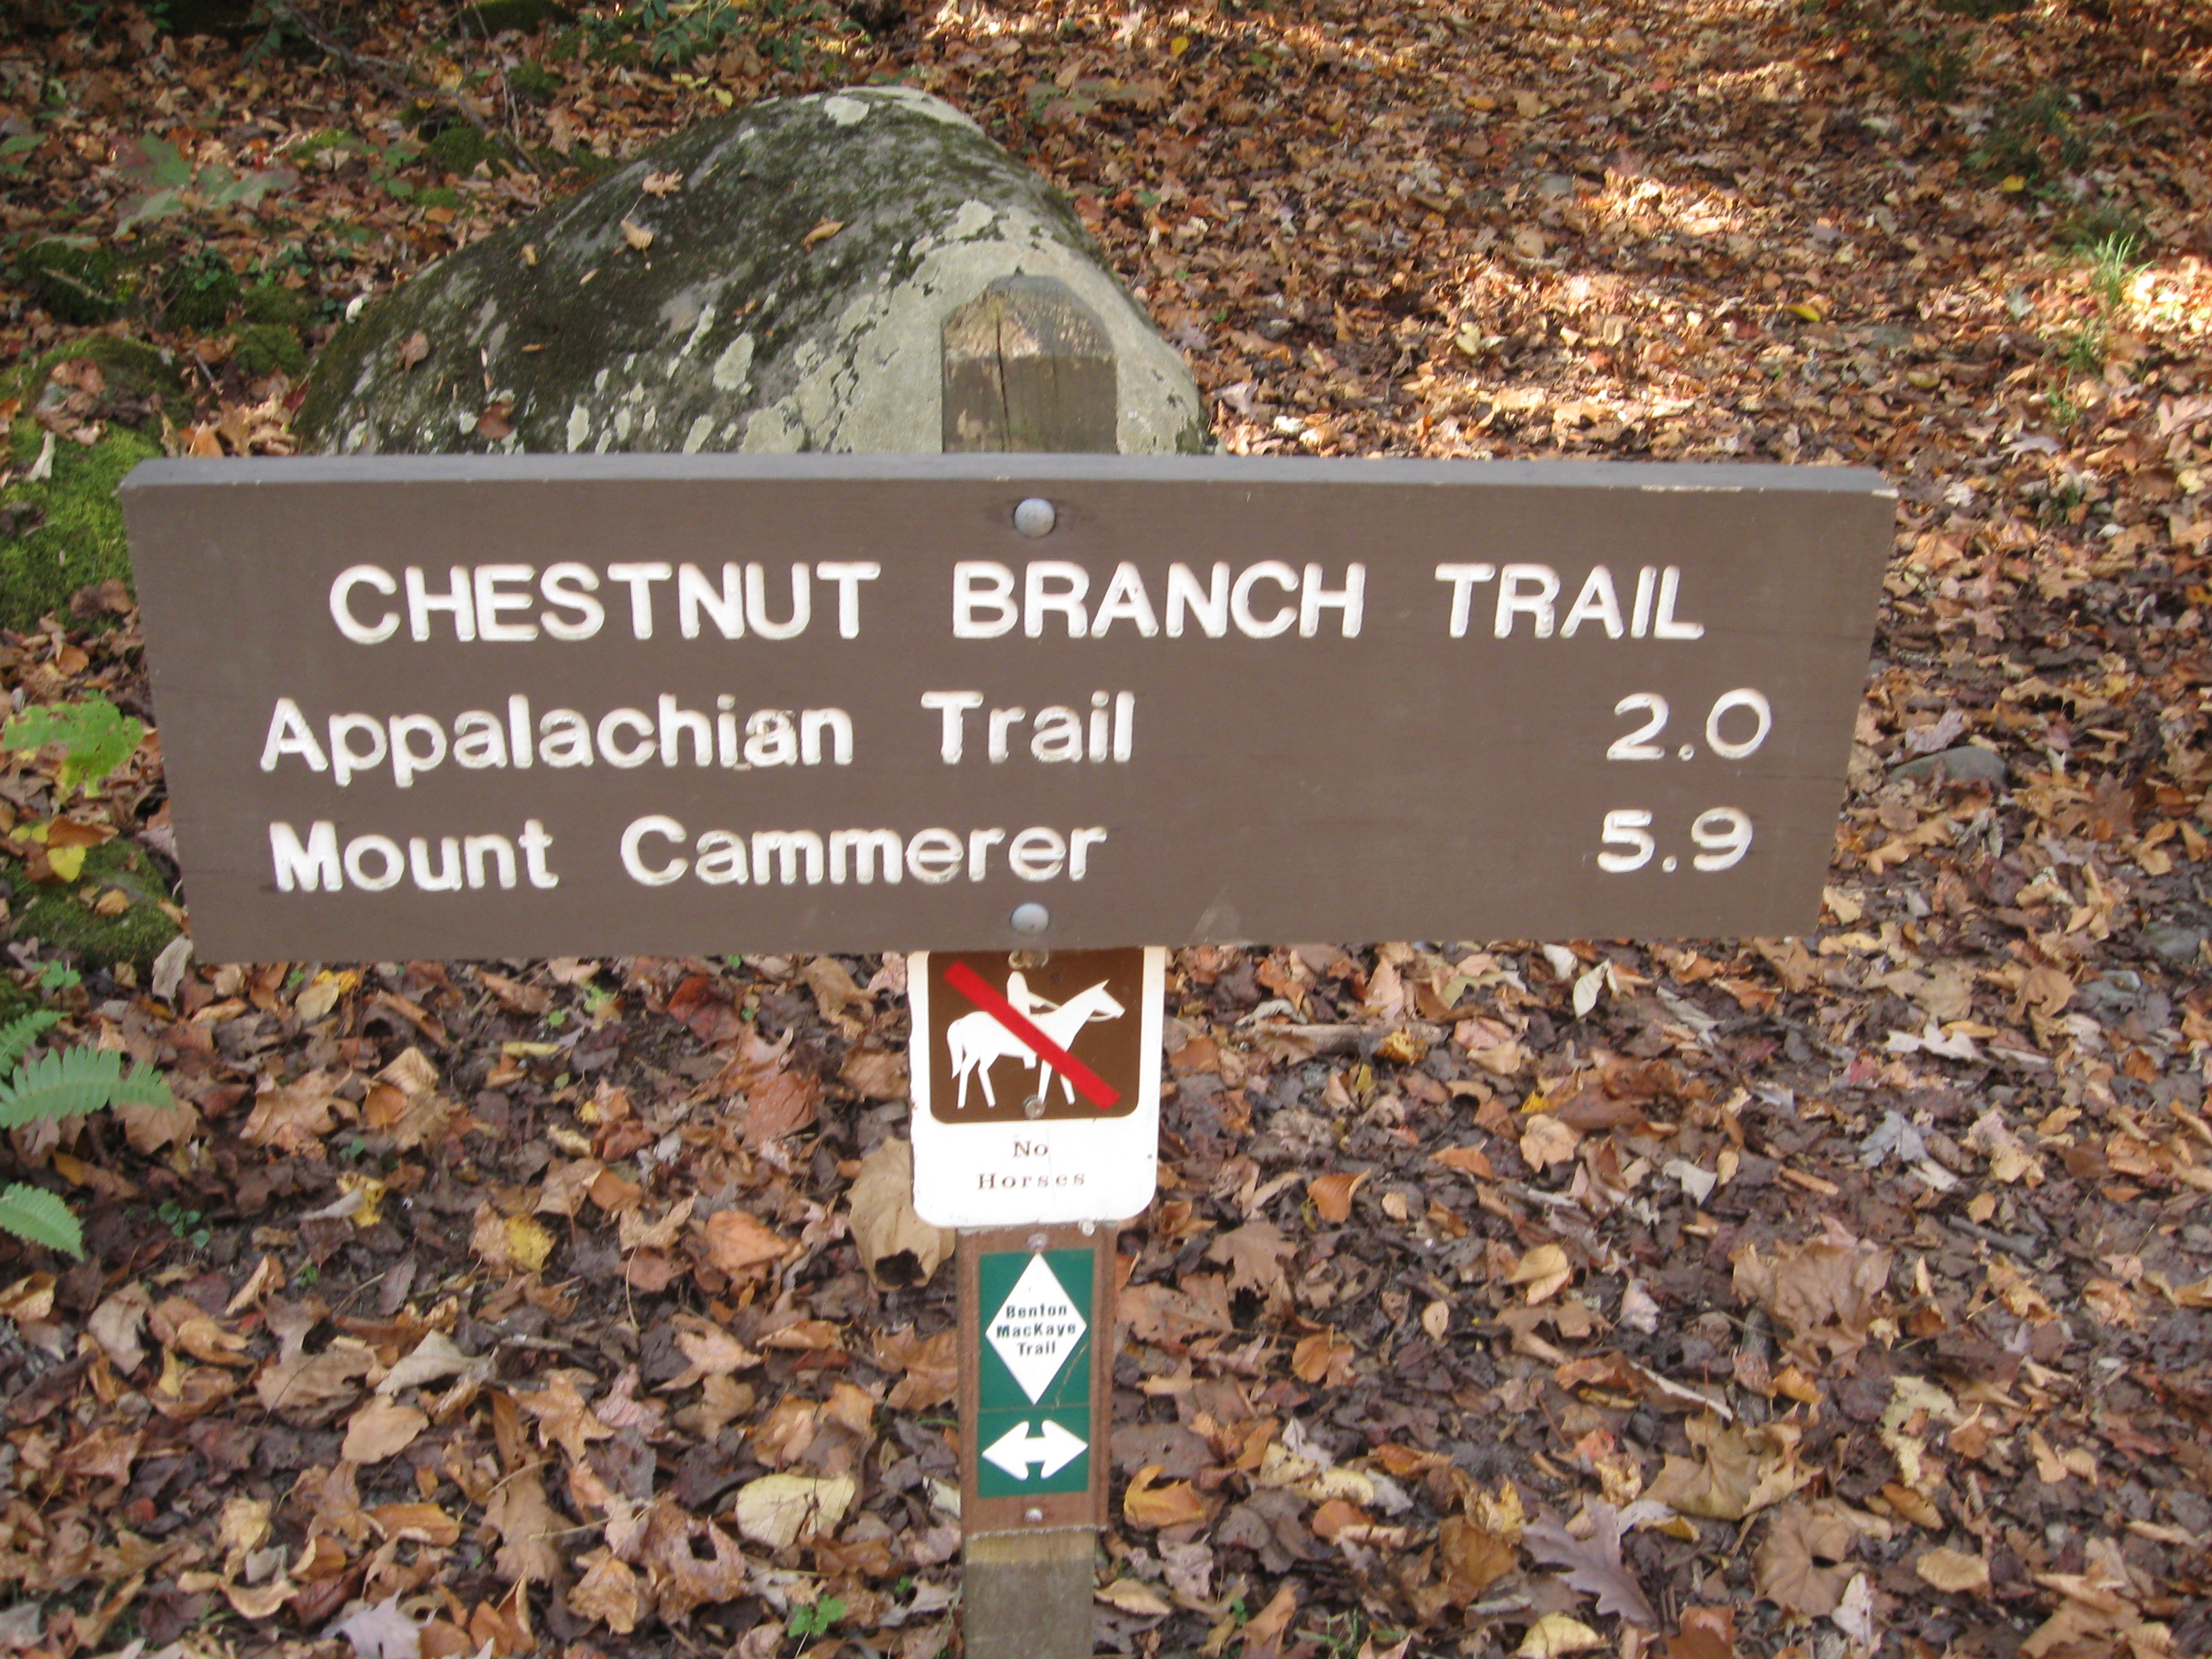 Chestnut Branch Trail trailhead, end of today's hike